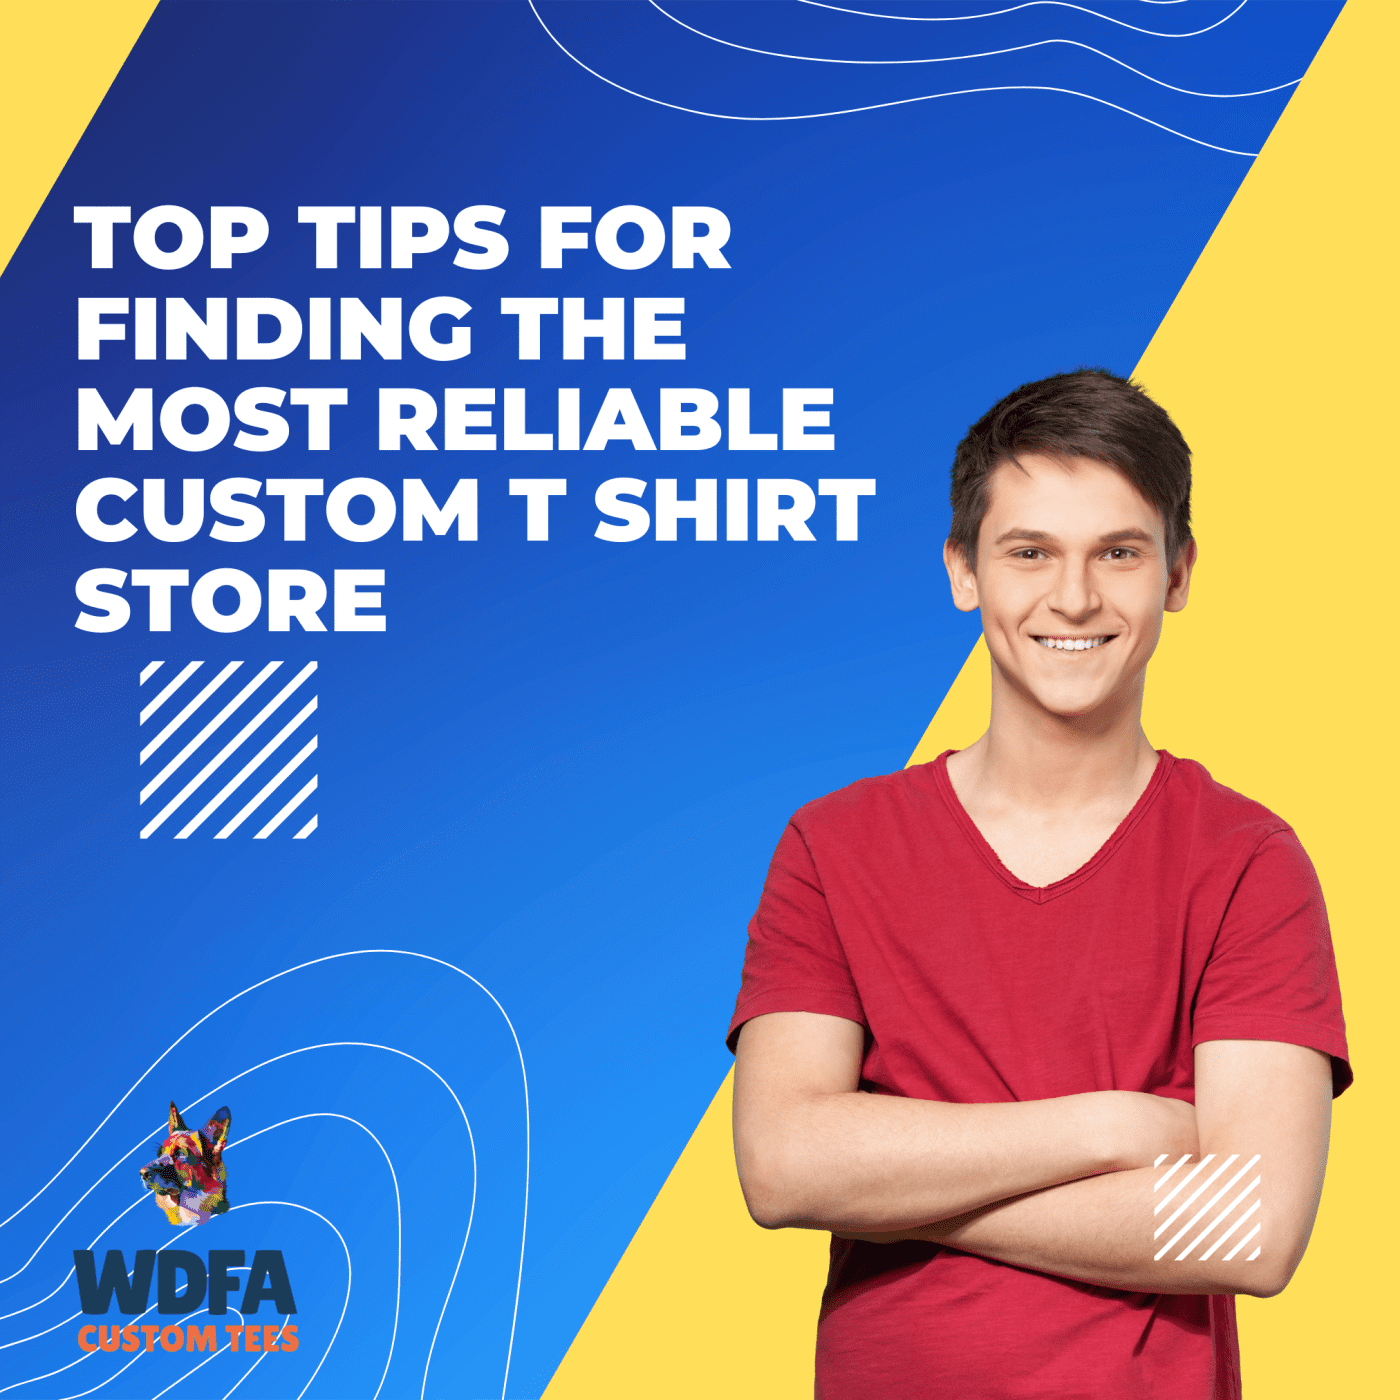 Top Tips for Finding the Most Reliable Custom T Shirt Store (Custom T Shirt Store) - custom t shirts, t-shirt printing, tshirt printing, fremont newark union city hayward san jose san francisco, personalized t-shirts